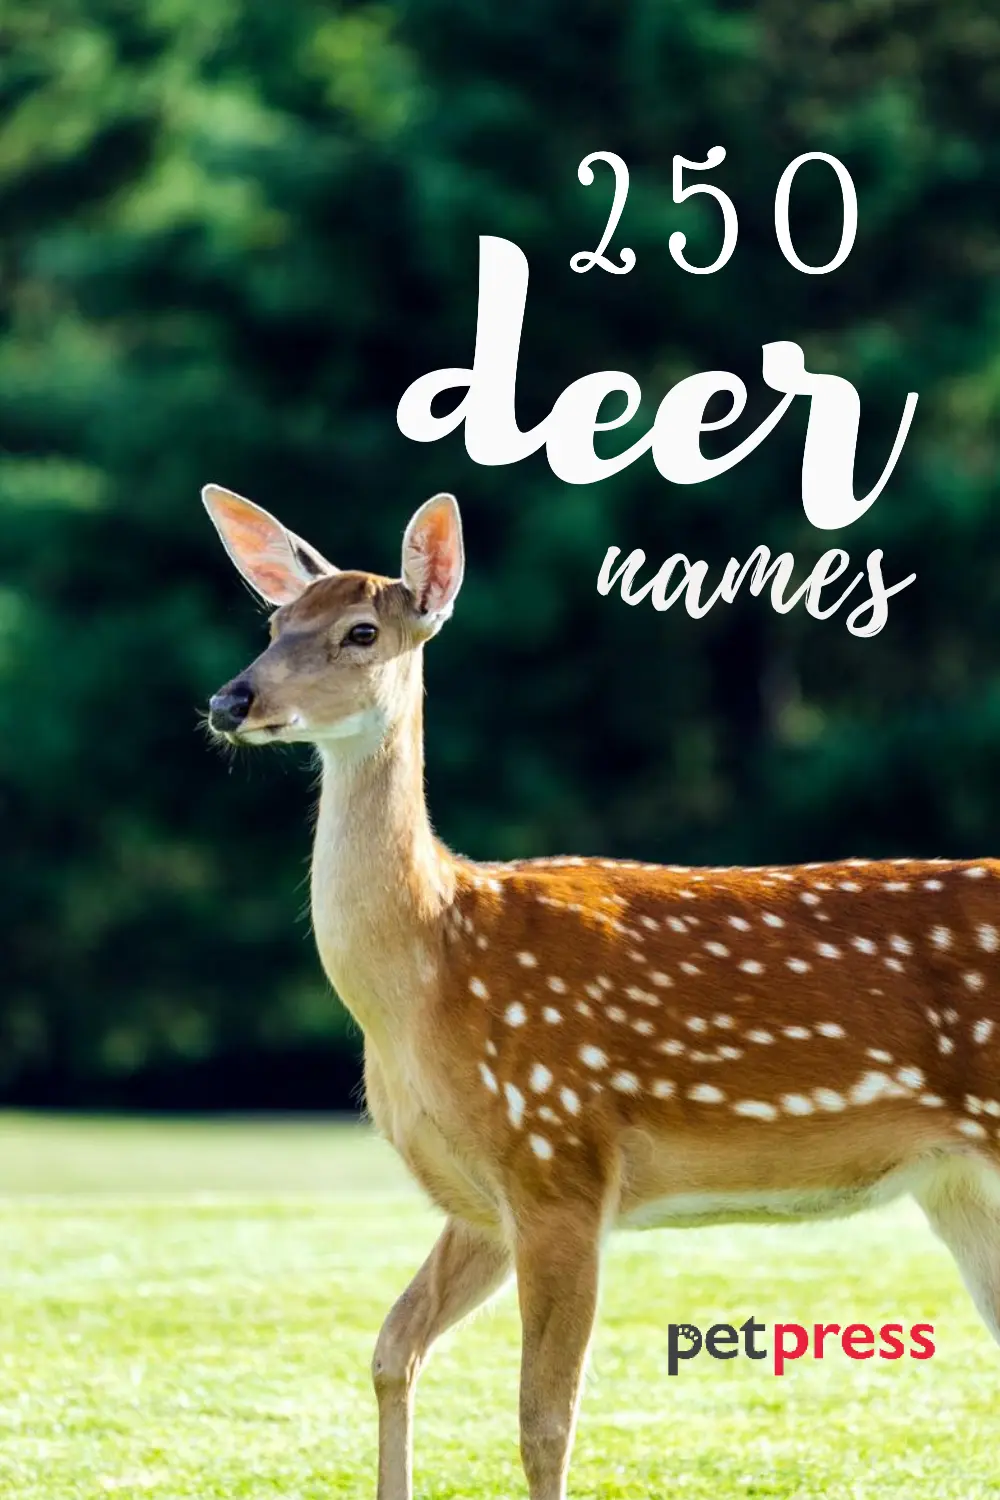 What are good names for deer?